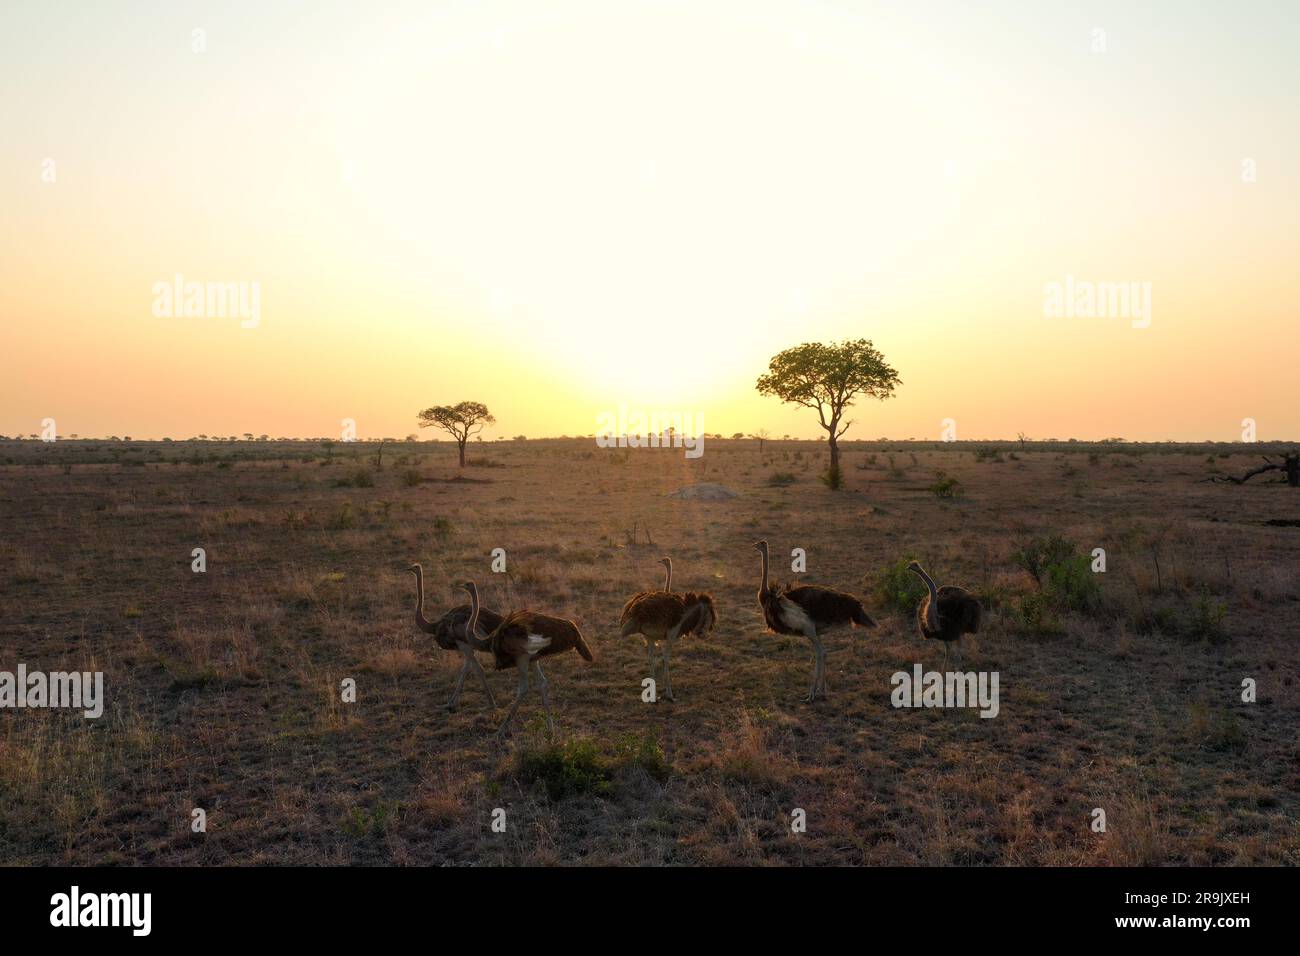 A flock of ostritch, Struthio, walk together at sunset. Stock Photo